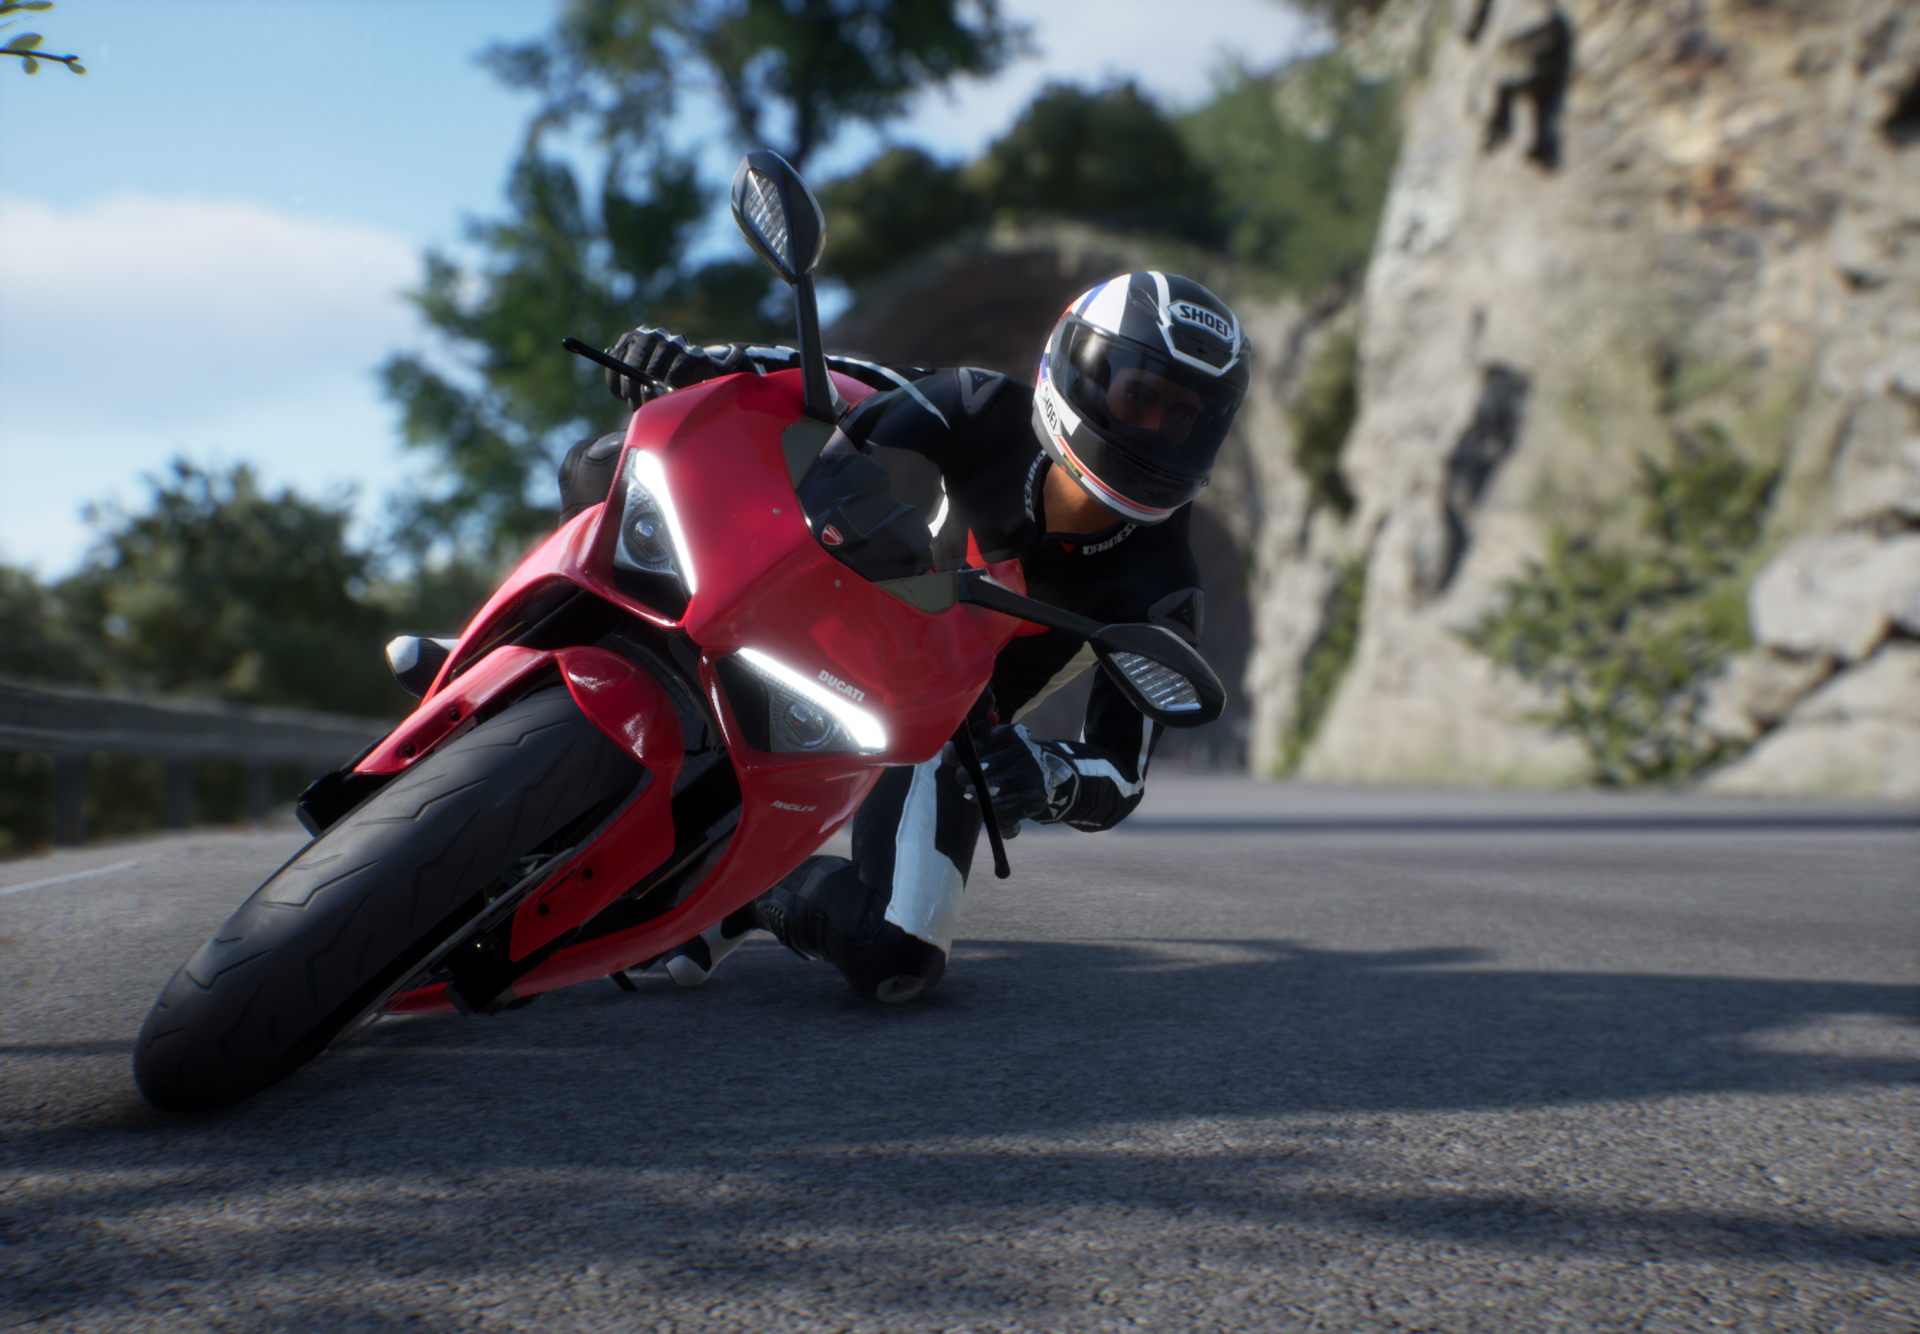 RIDE 3 PS4 Review #32